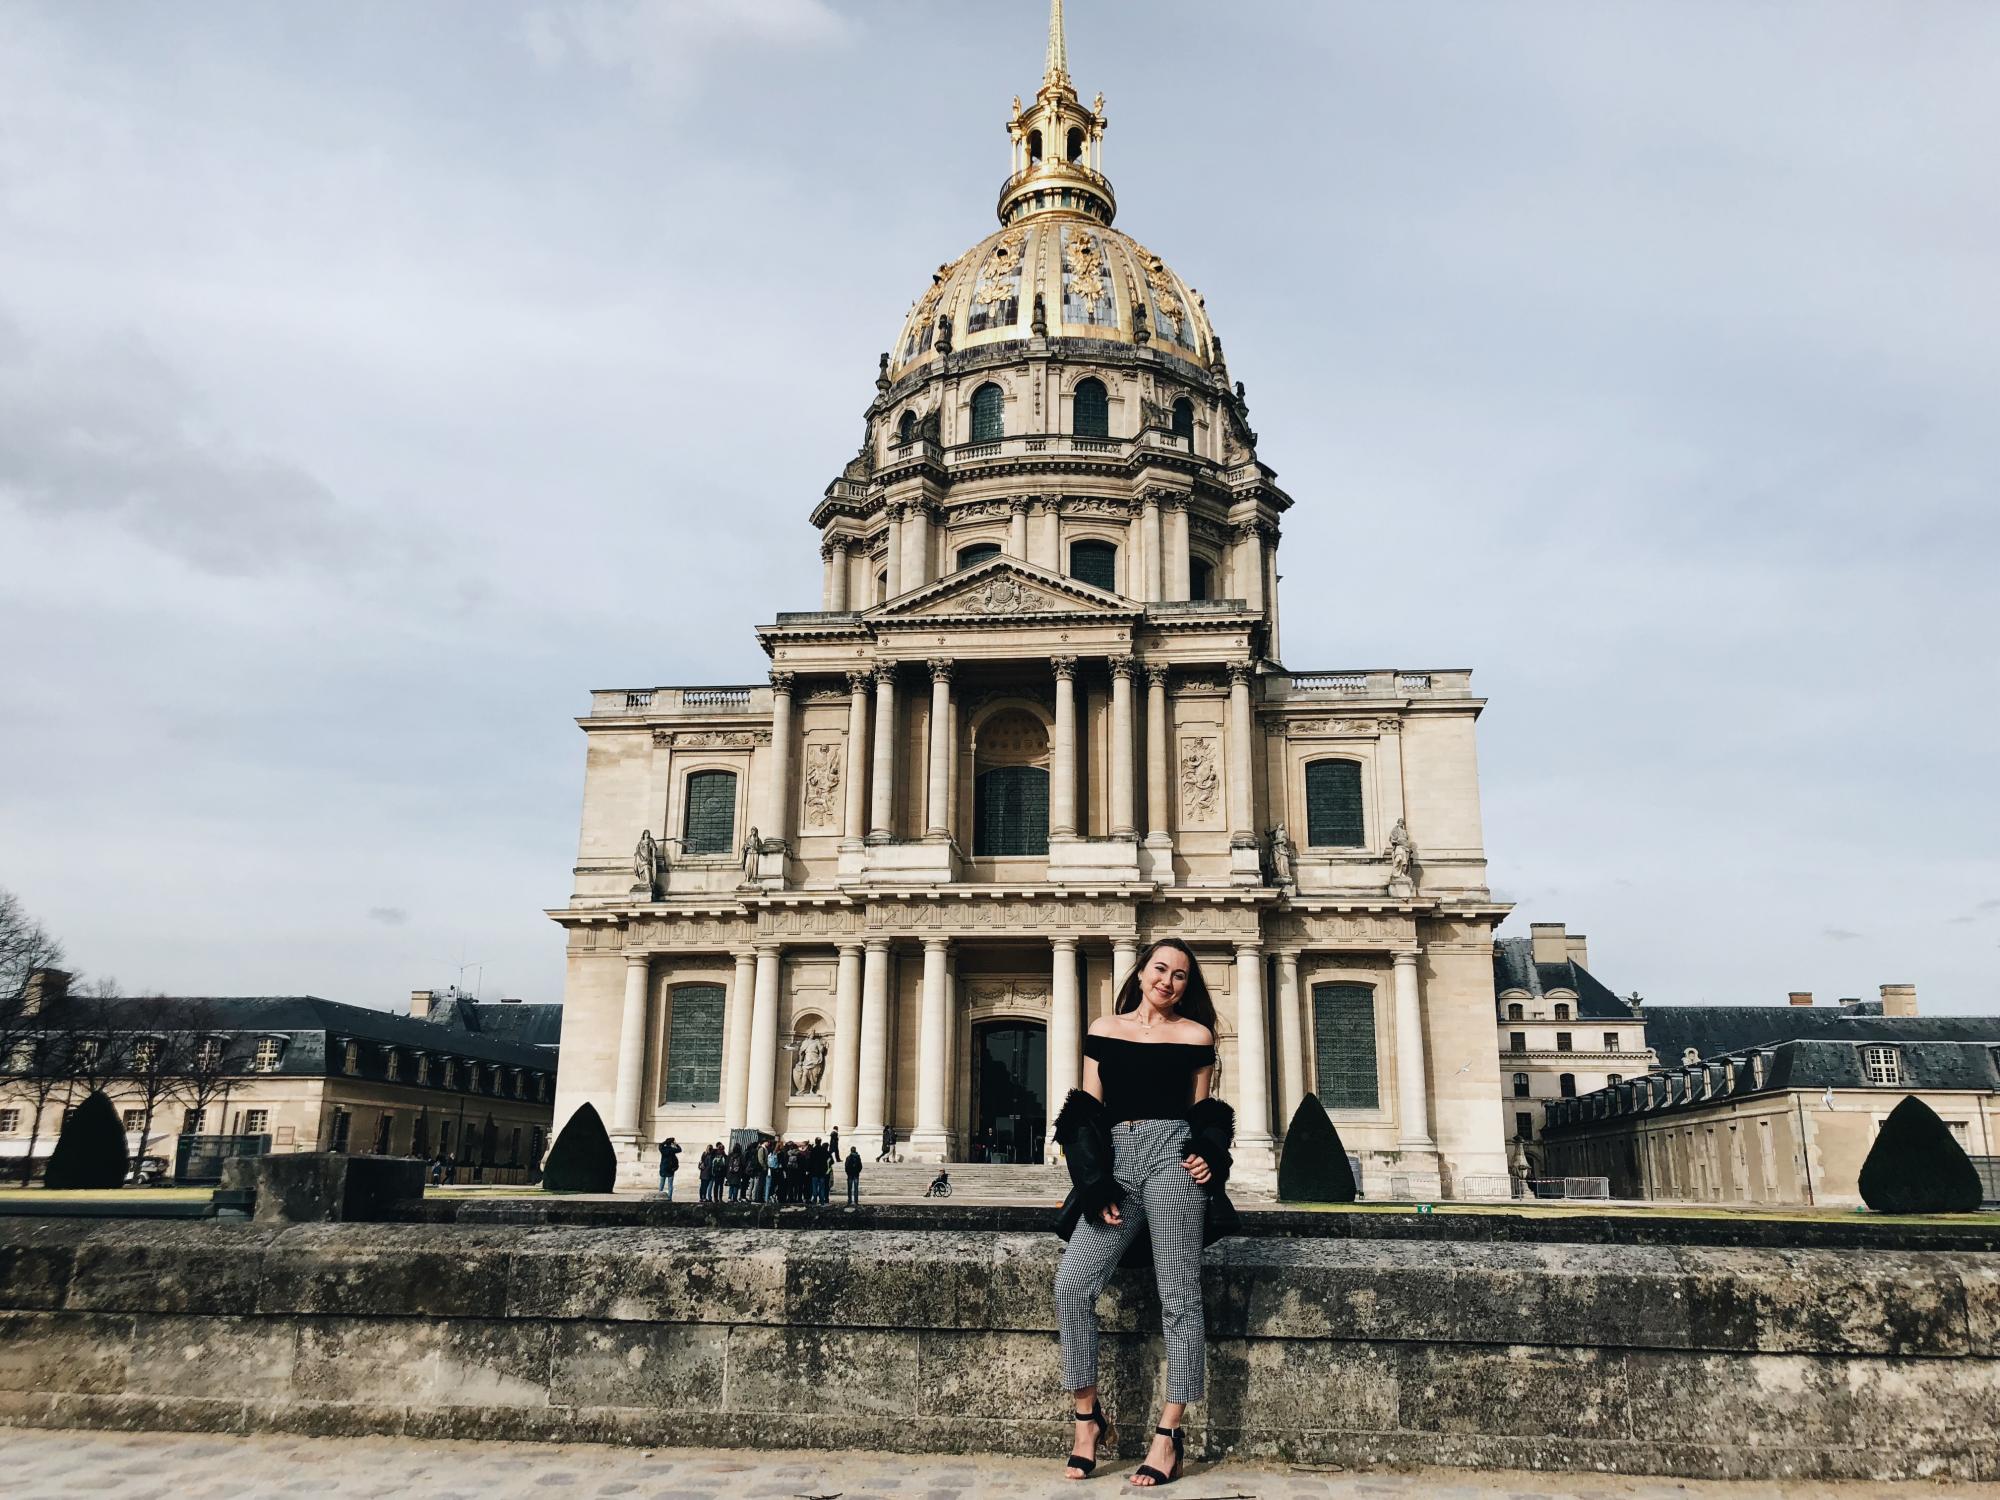 in front of Les Invalides​